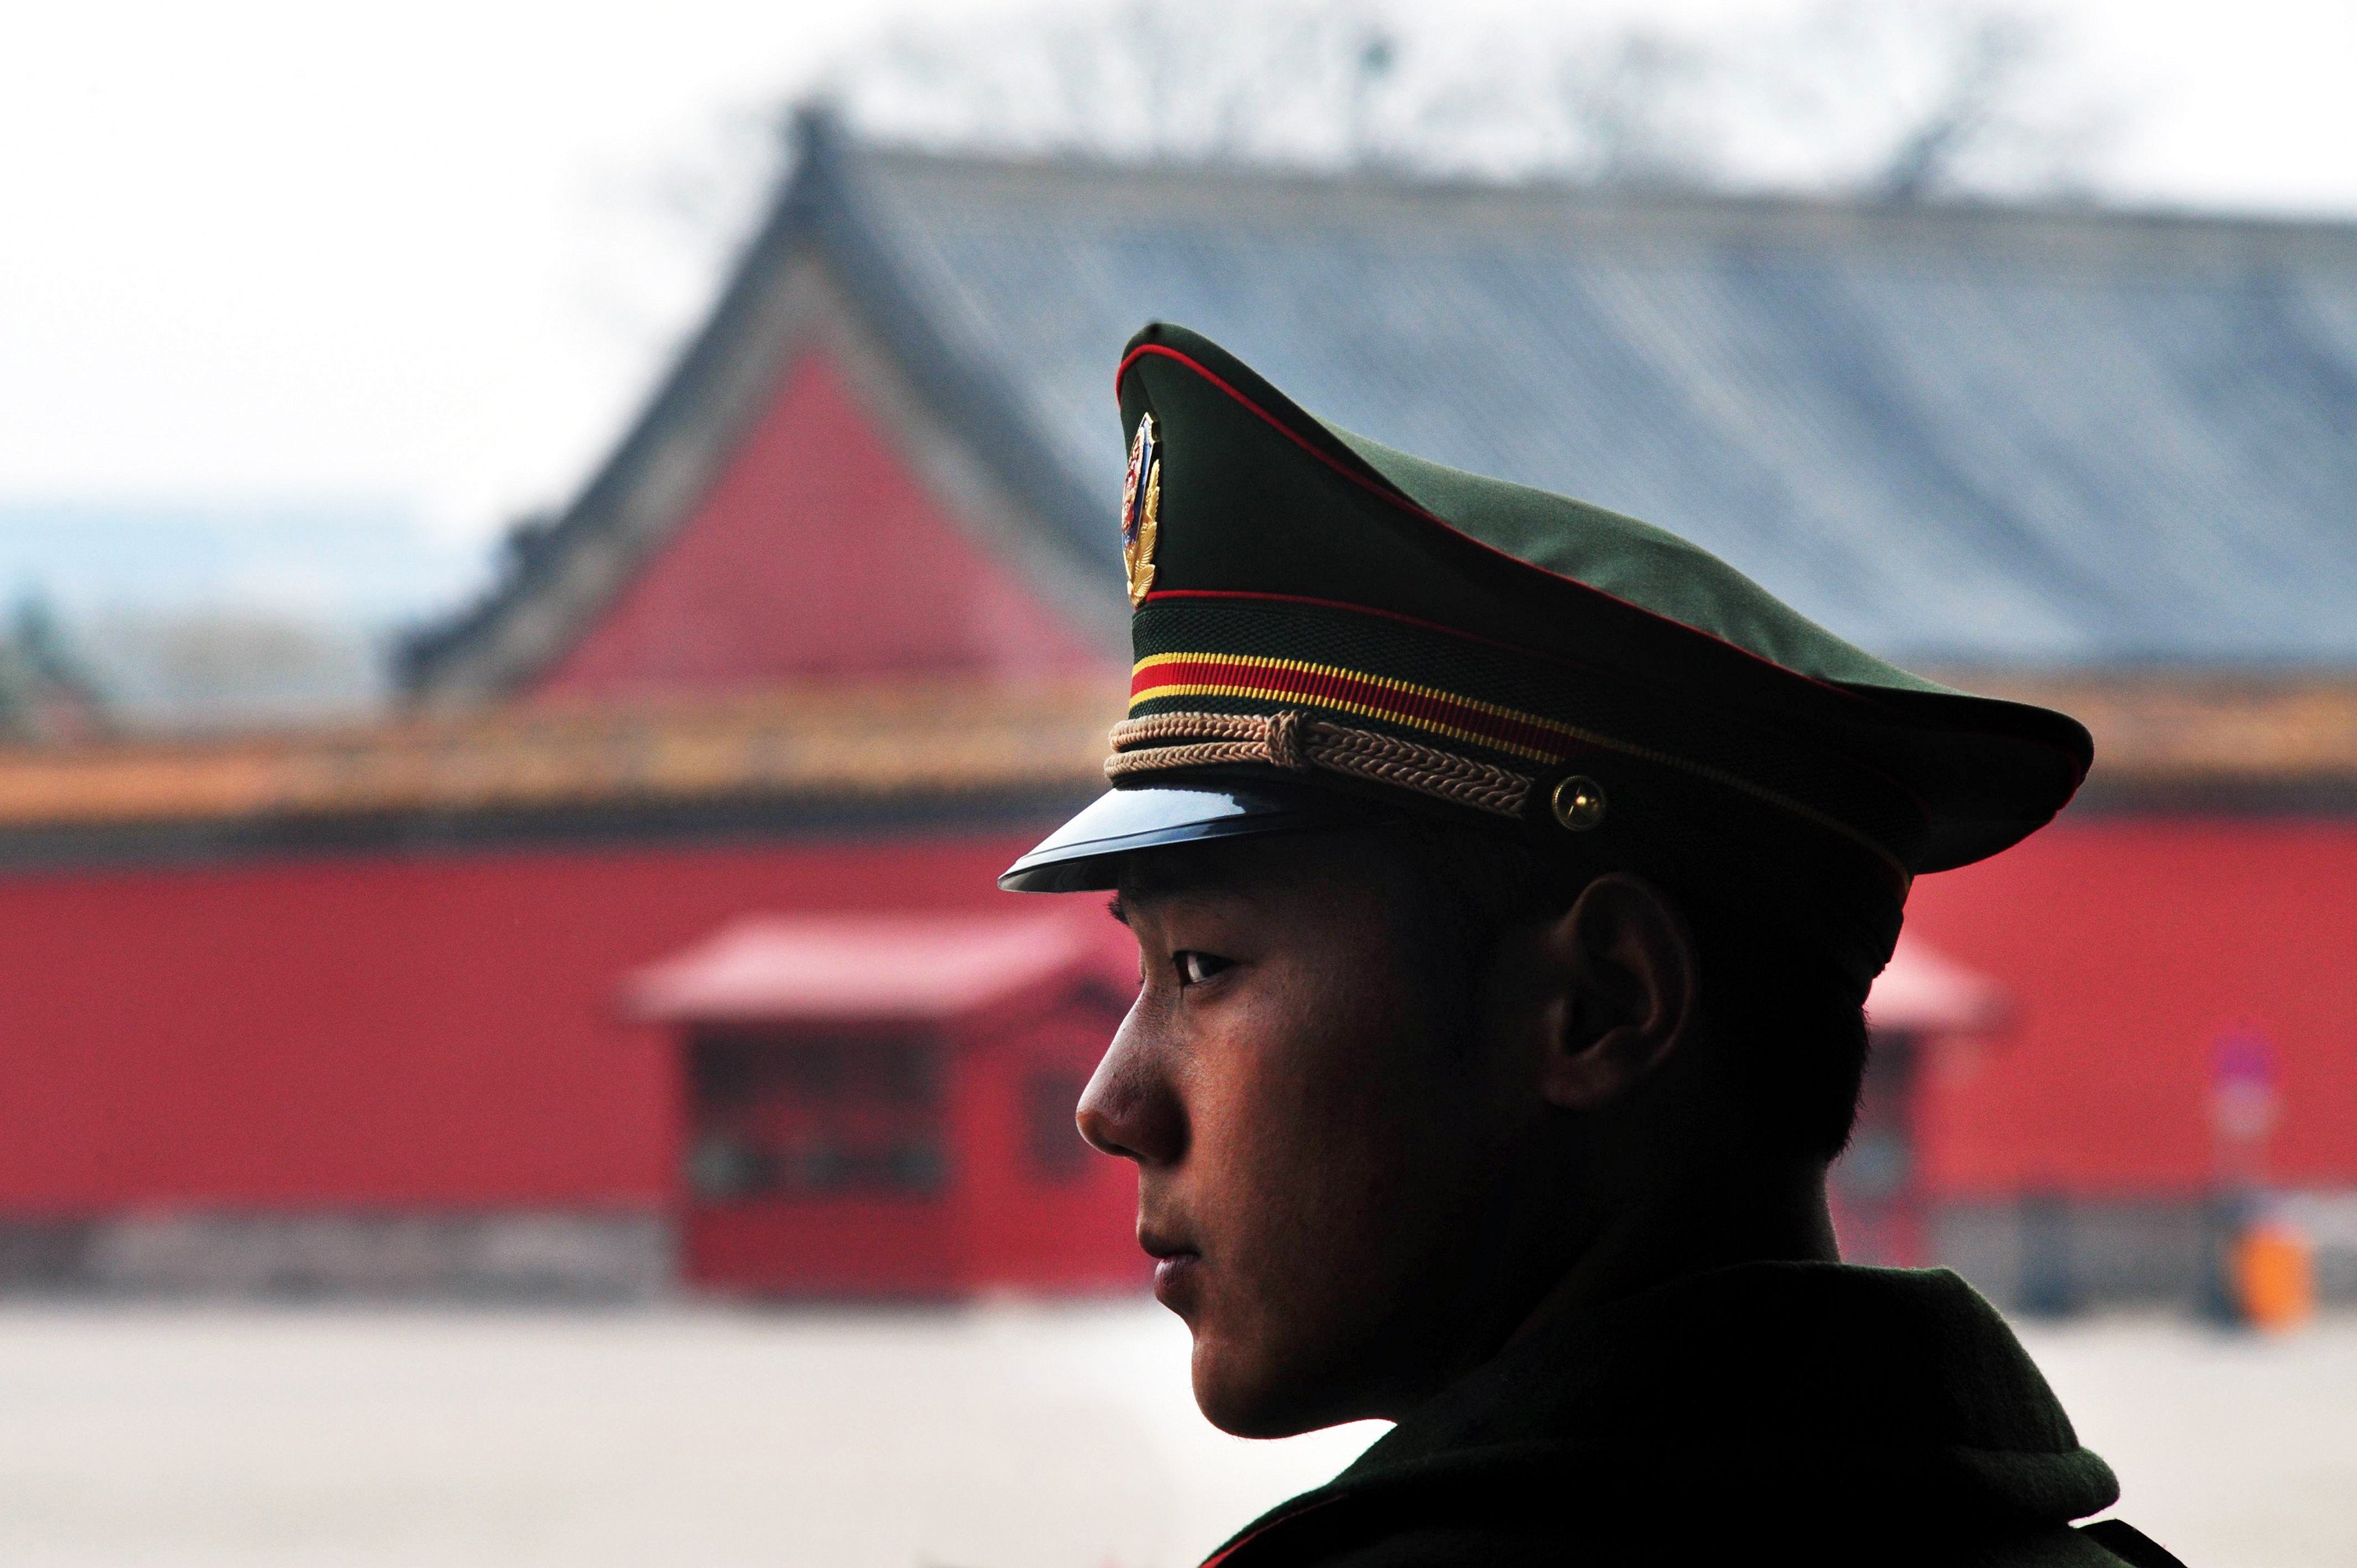 China’s revised counter-espionage law expands both the definition of spying and the investigative powers of national security agencies. Photo: Shutterstock